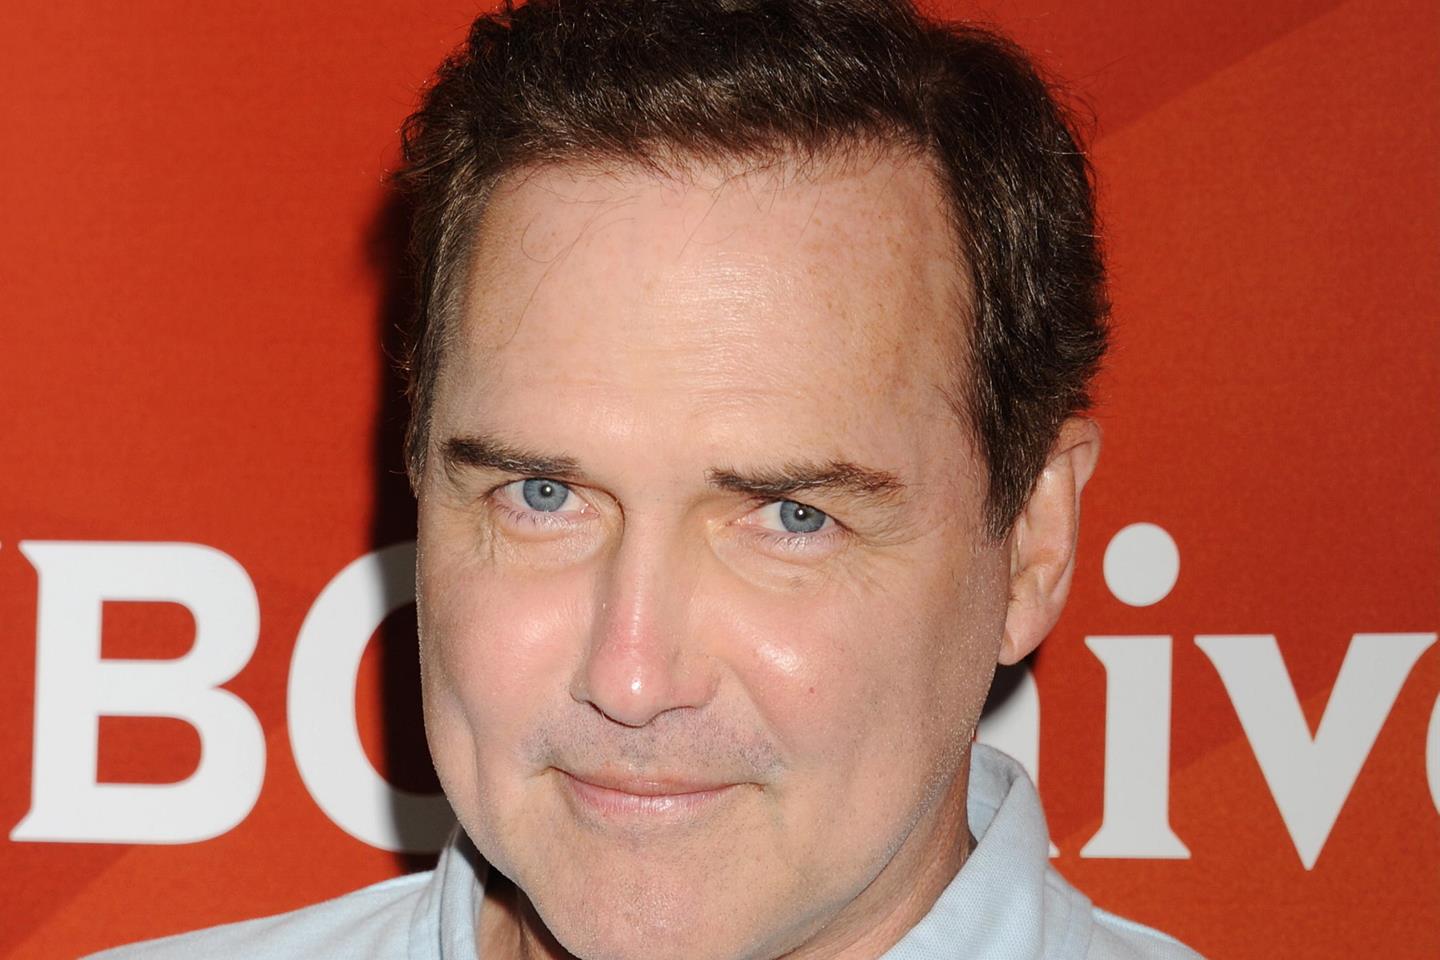 Norm Macdonald Tickets - Buy and sell Norm Macdonald Tickets